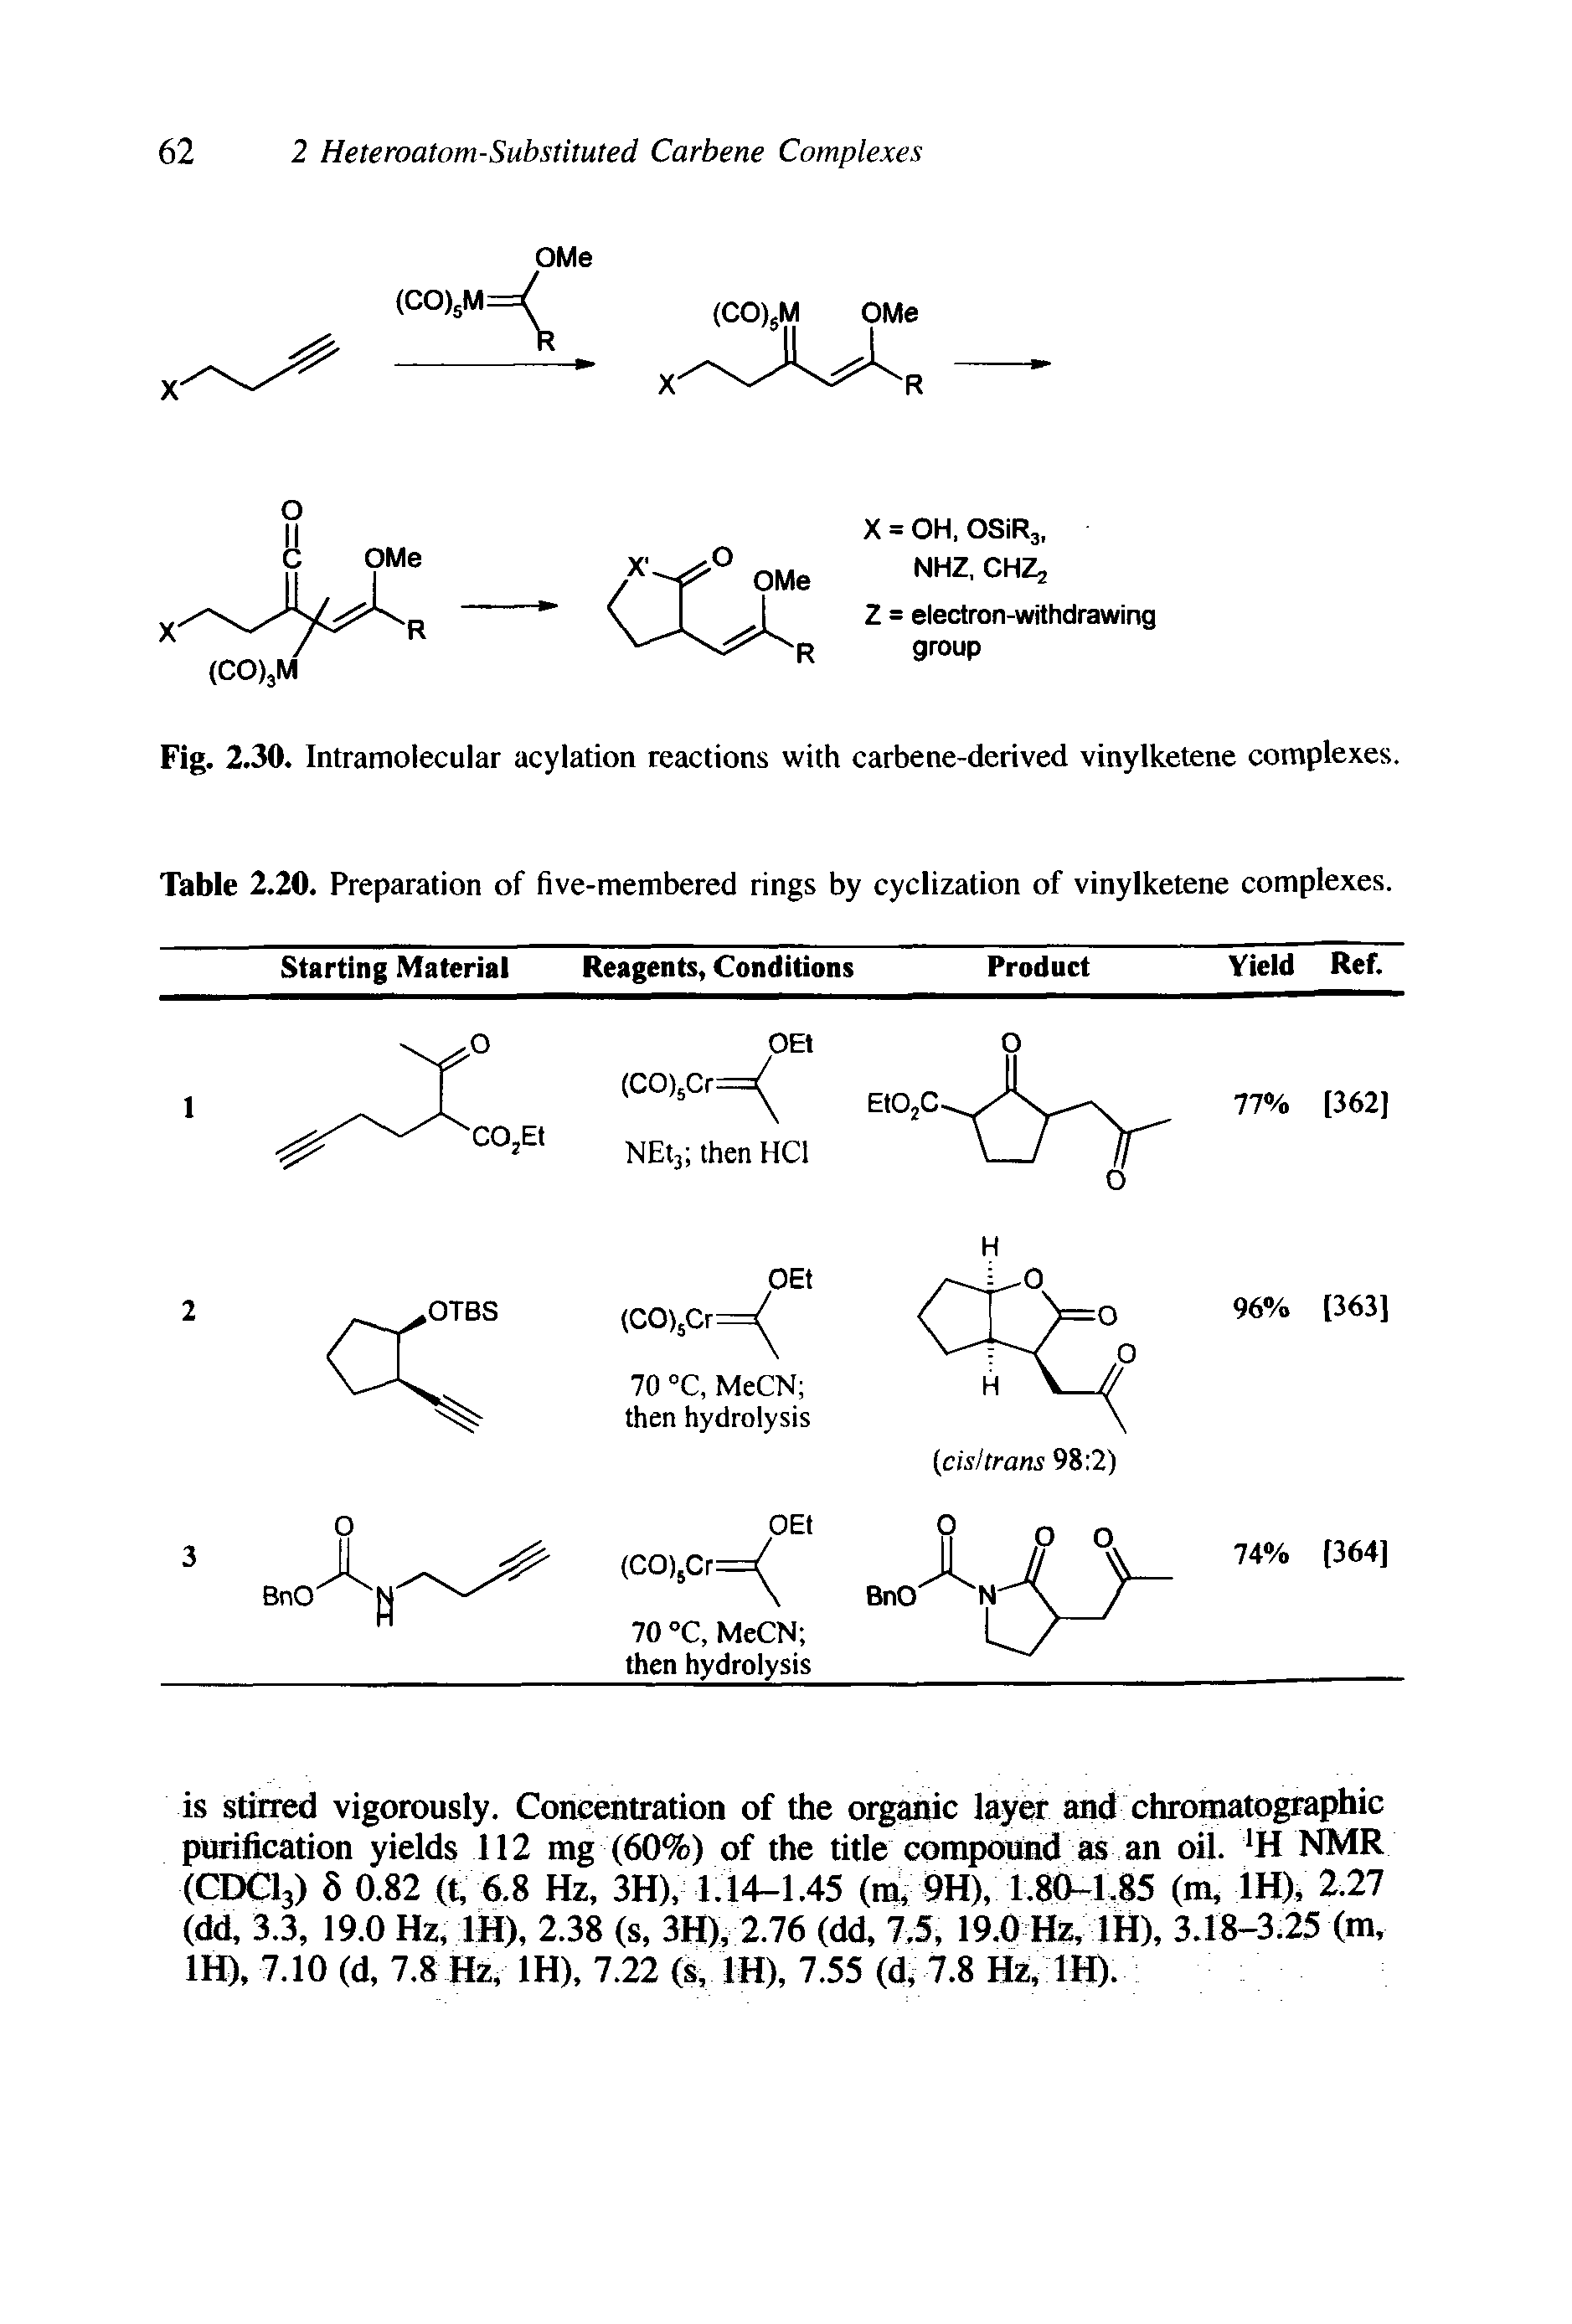 Fig. 2.30. Intramolecular acylation reactions with carbene-derived vinylketene complexes. Table 2.20. Preparation of five-membered rings by cyclization of vinylketene complexes.